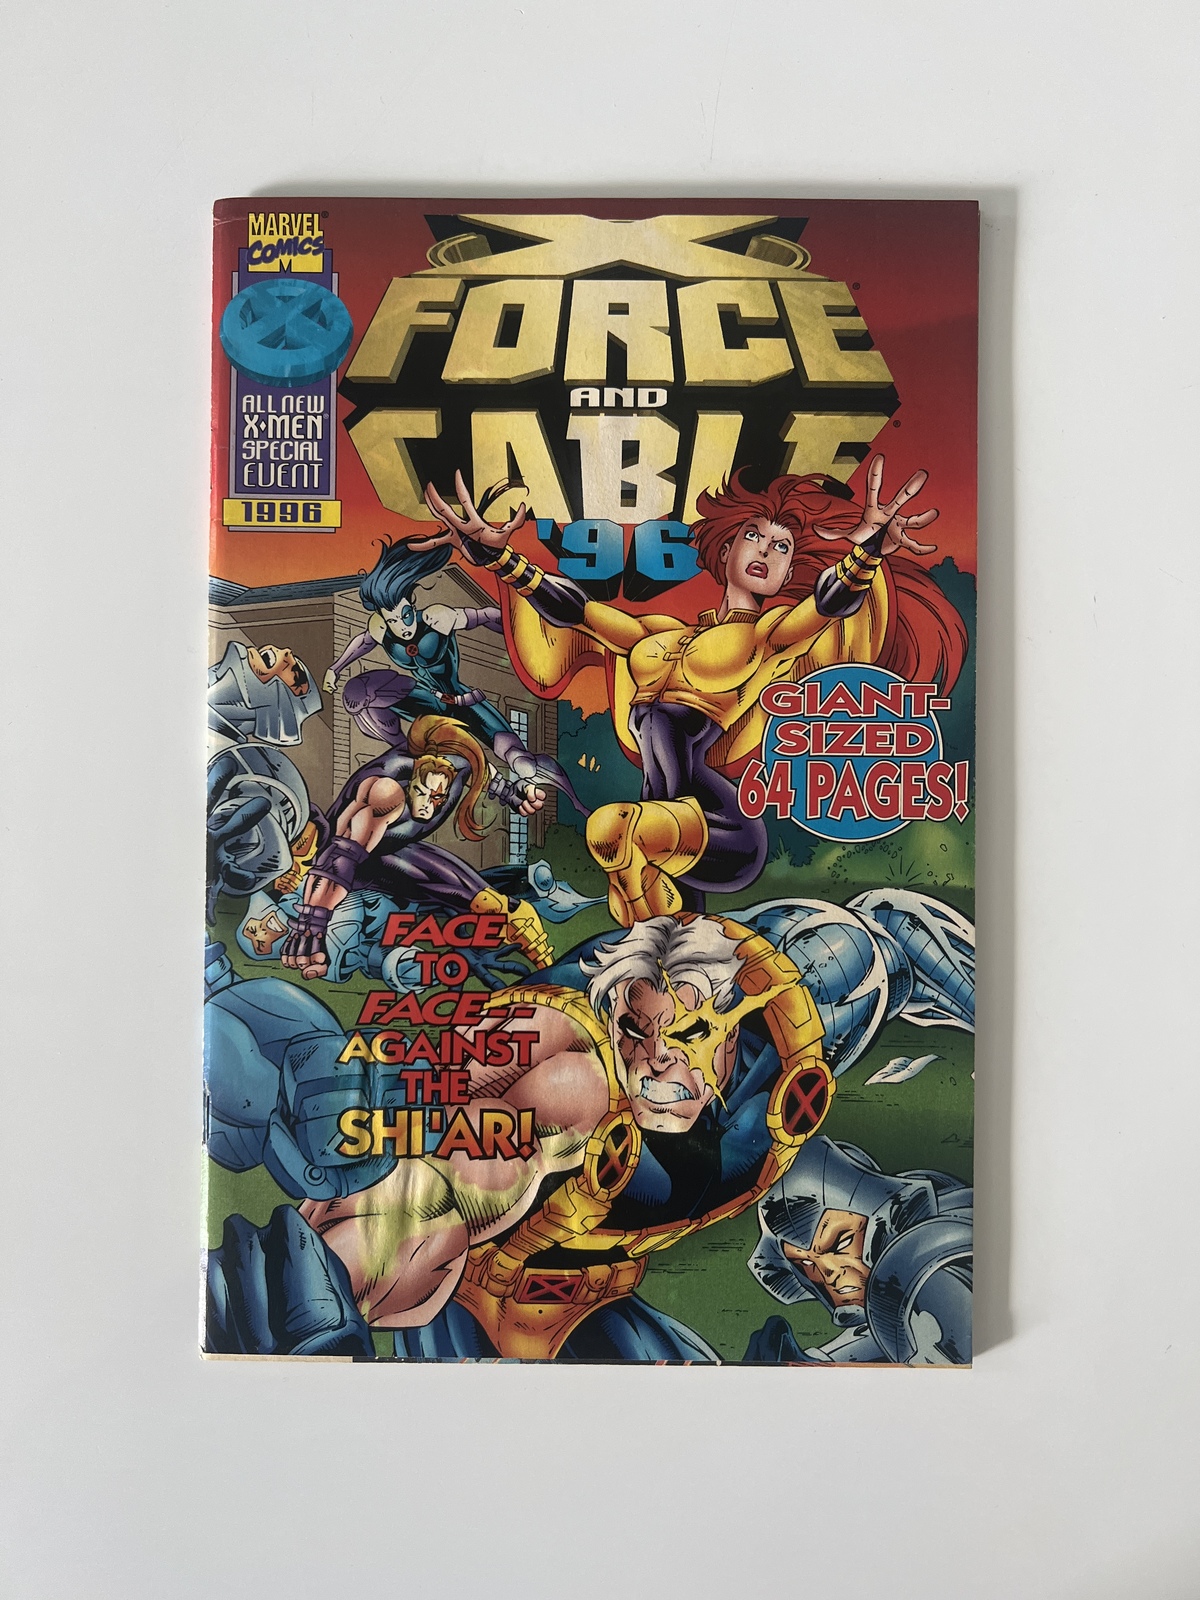 Primary image for Cable / X-Force Vol. 1 '96 comic book